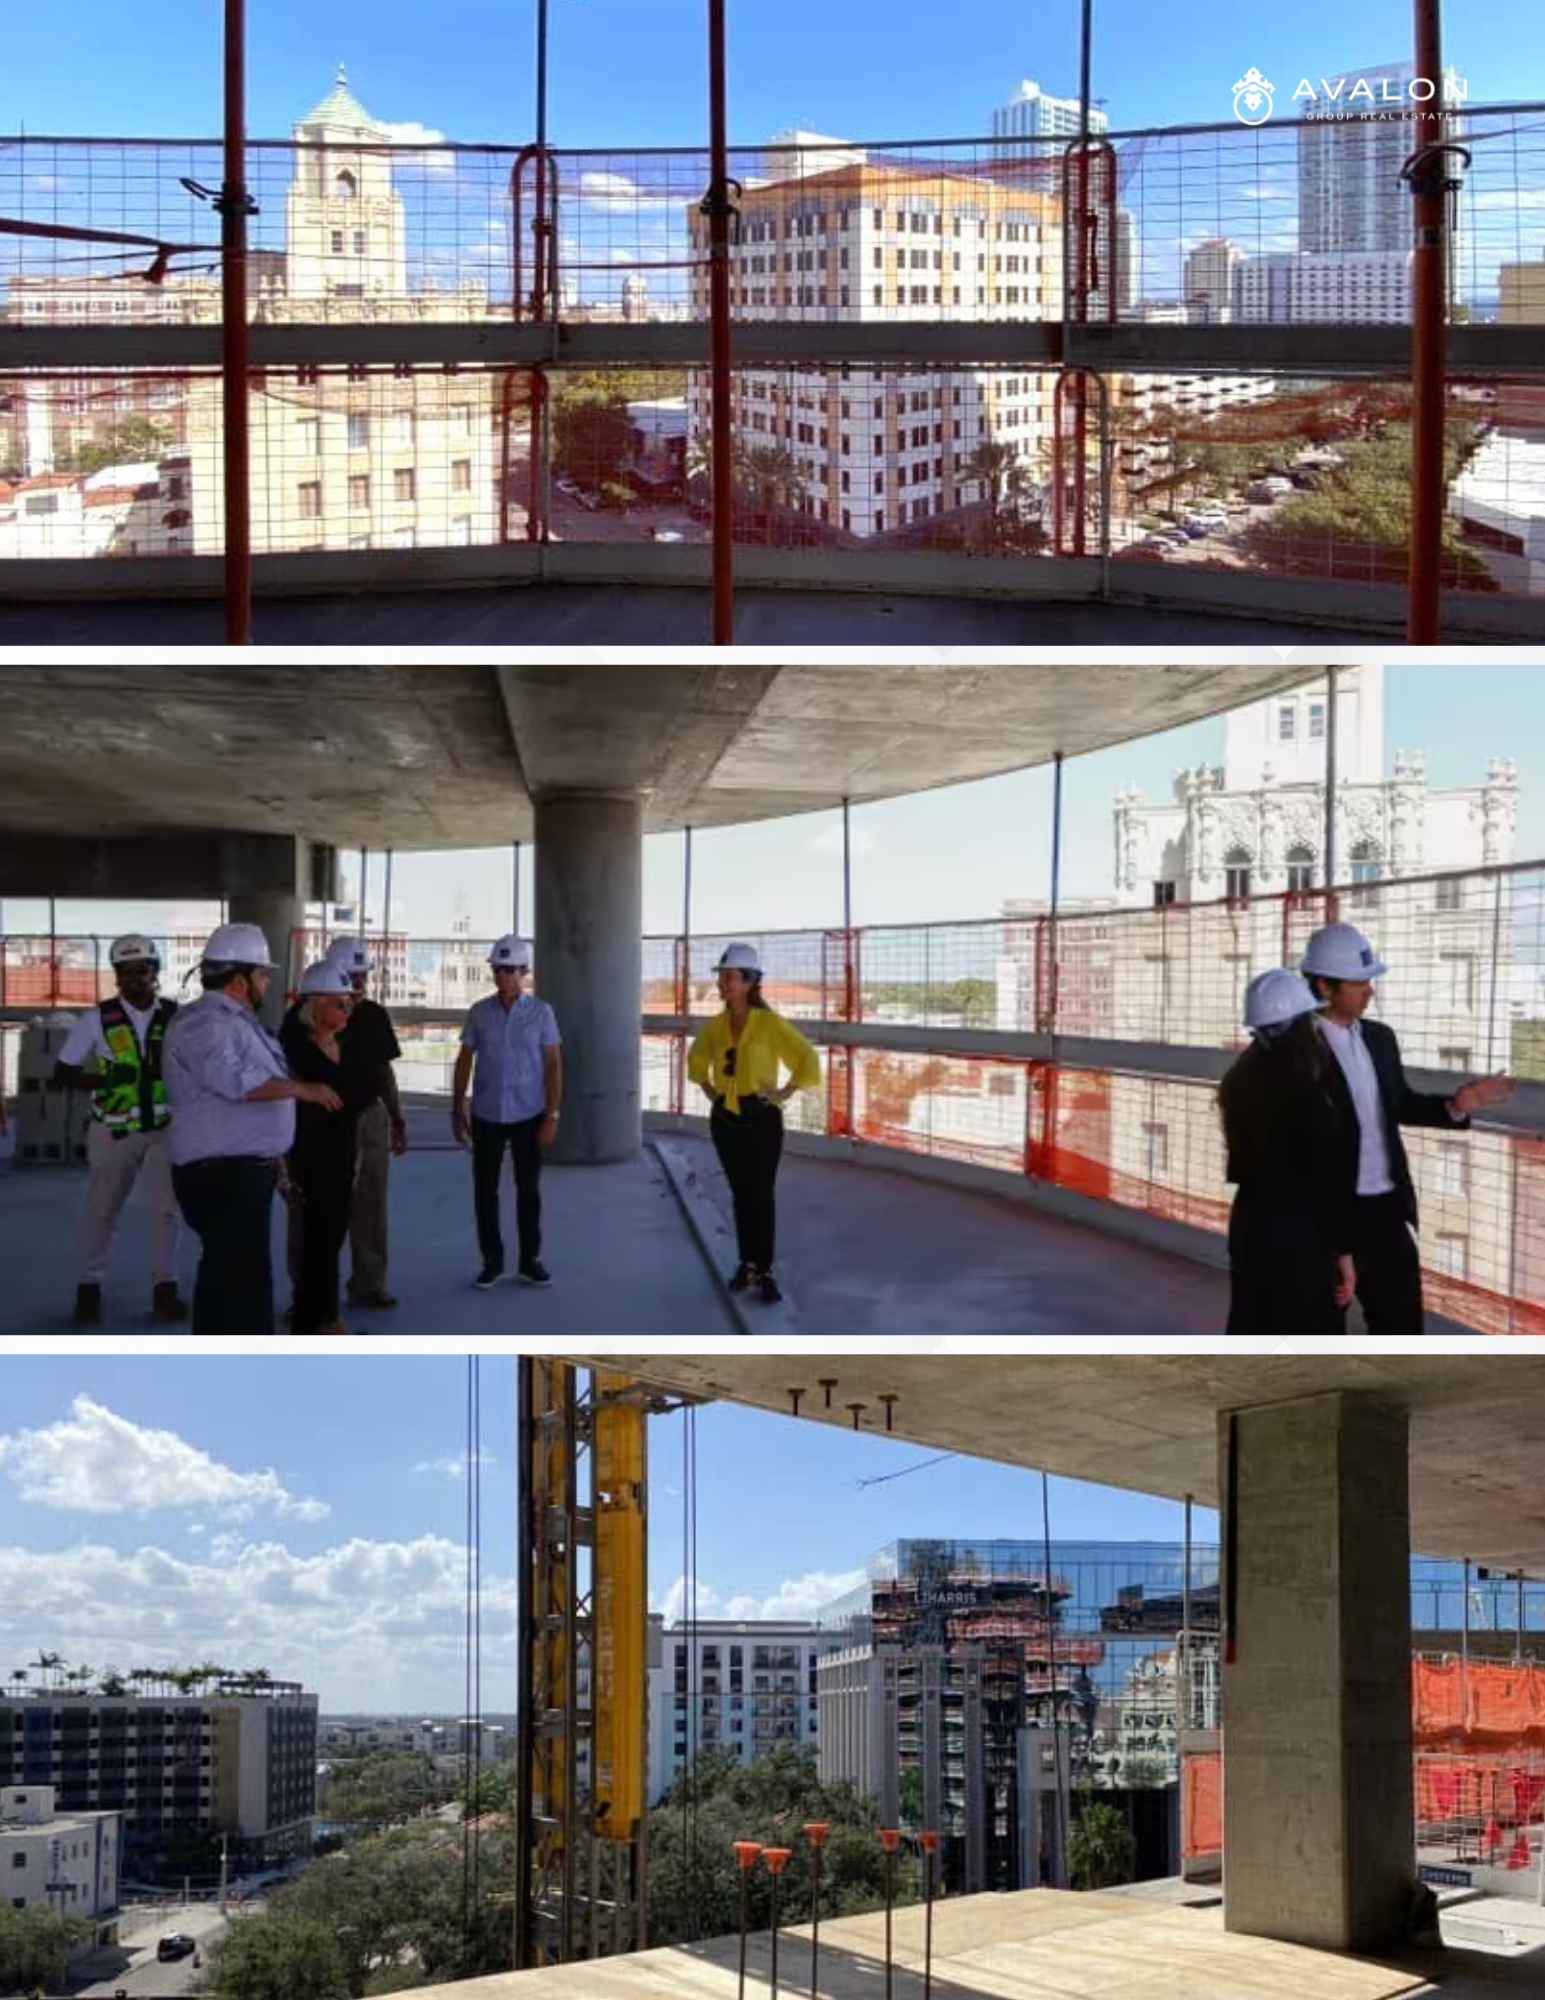 St Petersburg's Tallest Luxury High Rise Pictures inside the construction.  two pictures show the open floors with shower openings in the cement.  The center picture shows people wearing white construction hats.